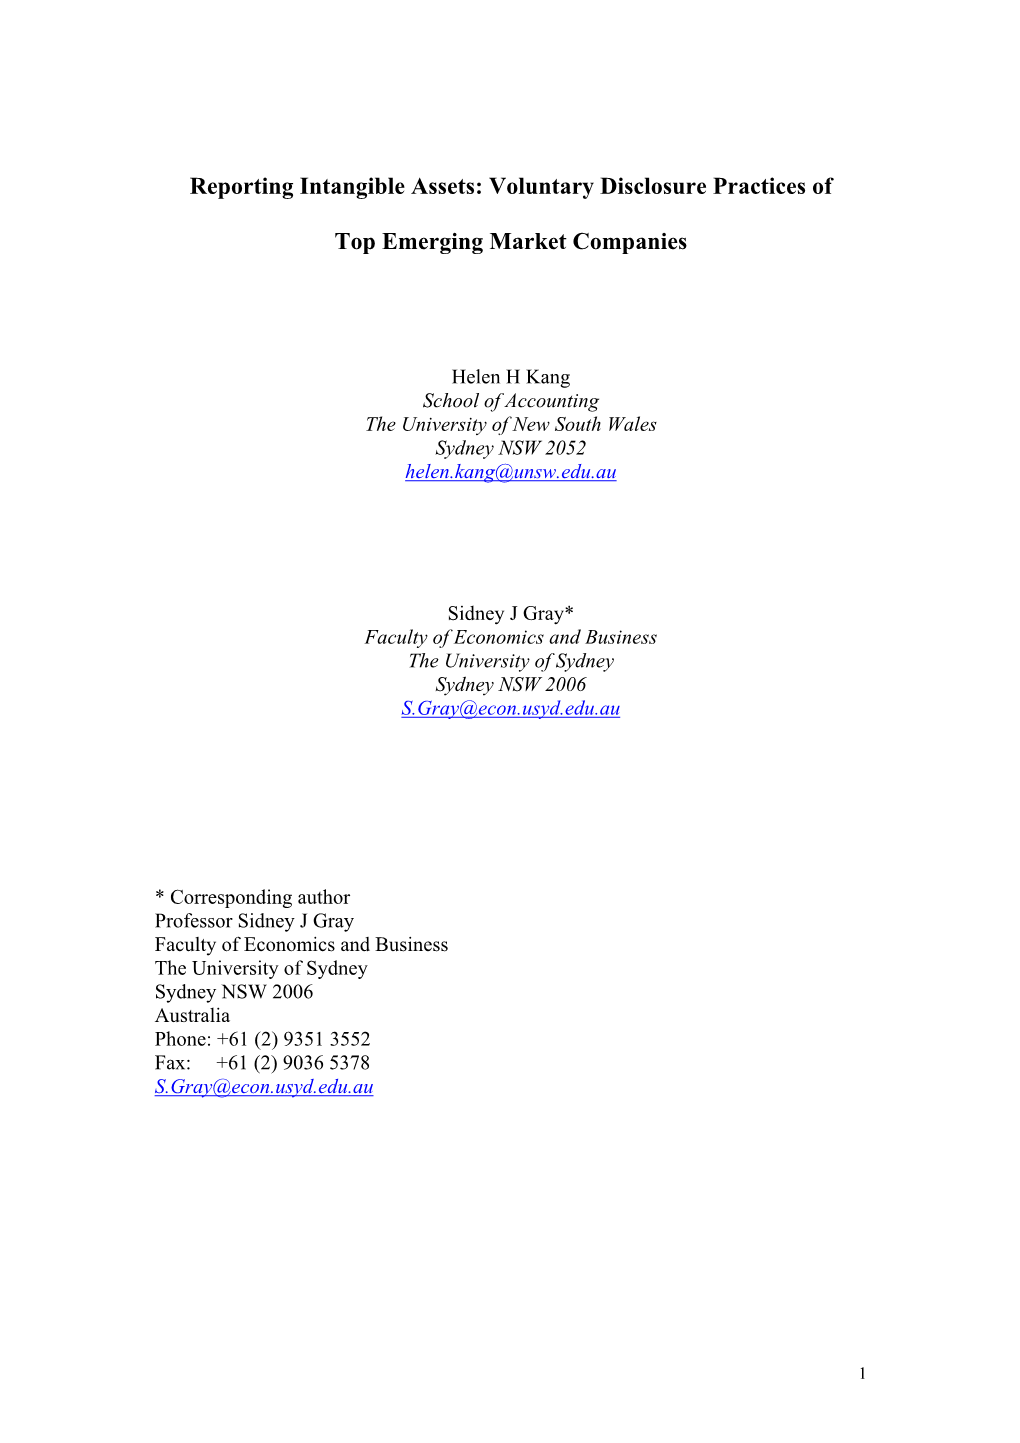 Reporting Intangible Assets: Voluntary Disclosure Practices of Top Emerging Market Companies